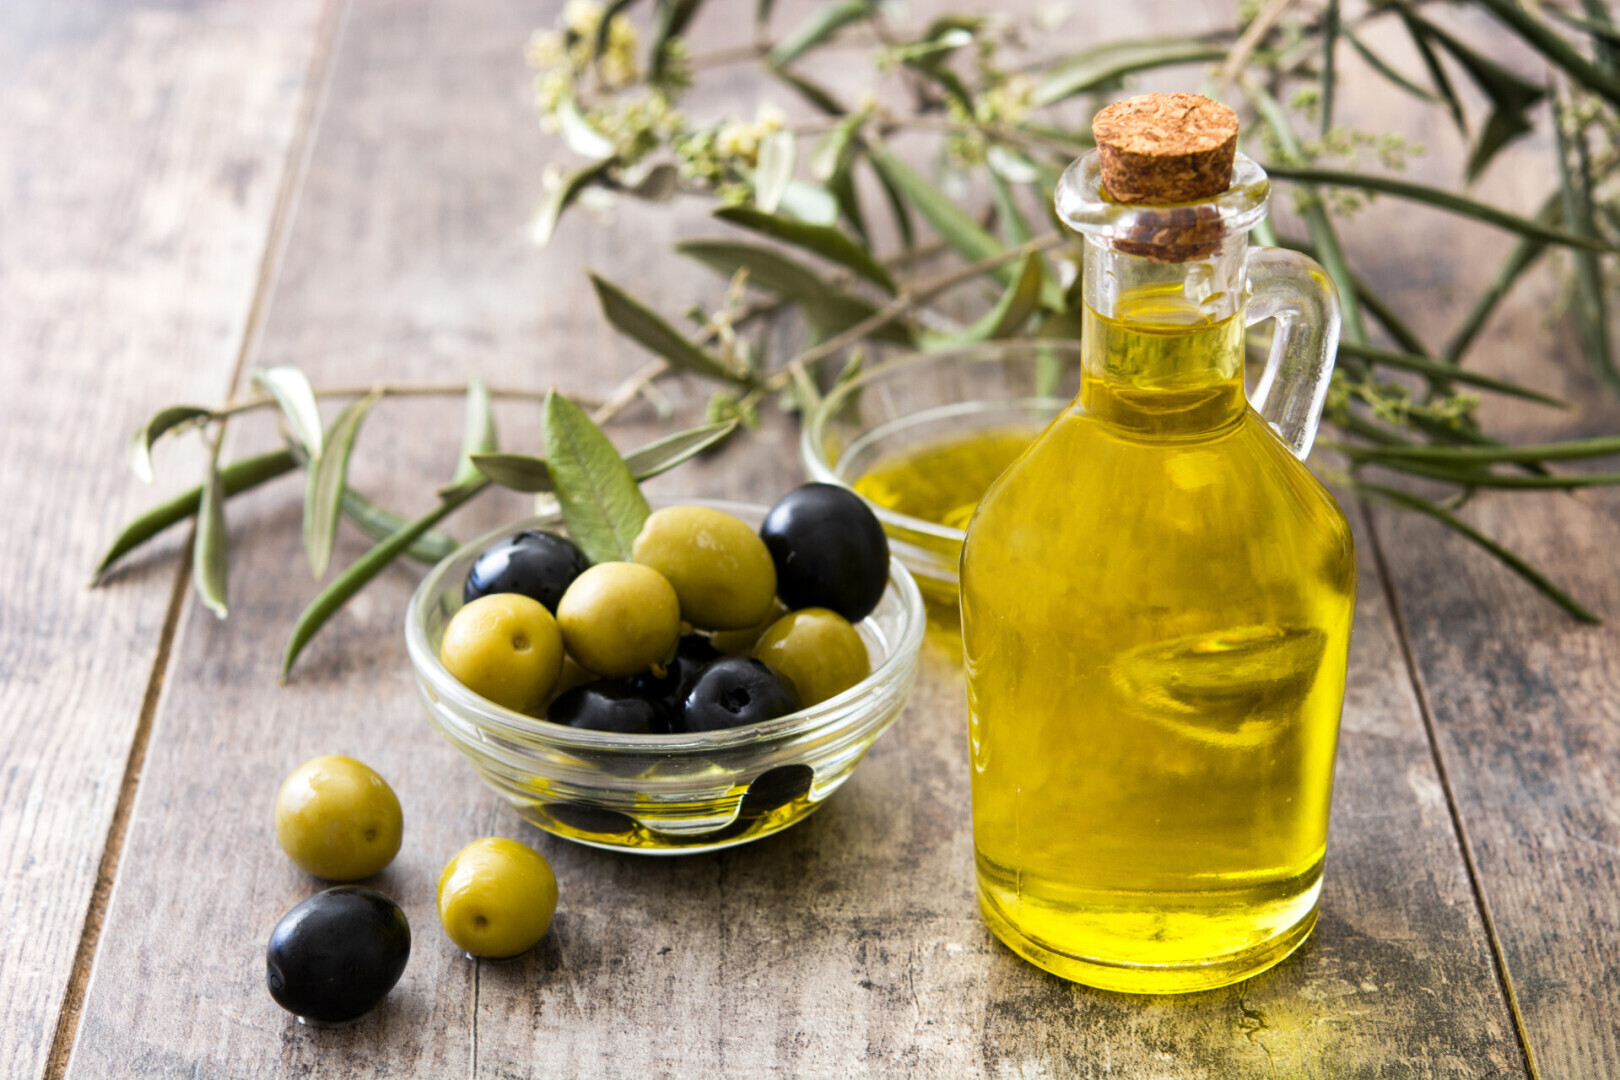 20 оливковое масло. Olive Oil масло оливковое. Зайтун меваси. Олив Ойл масло оливковое. Французские масла Olive.